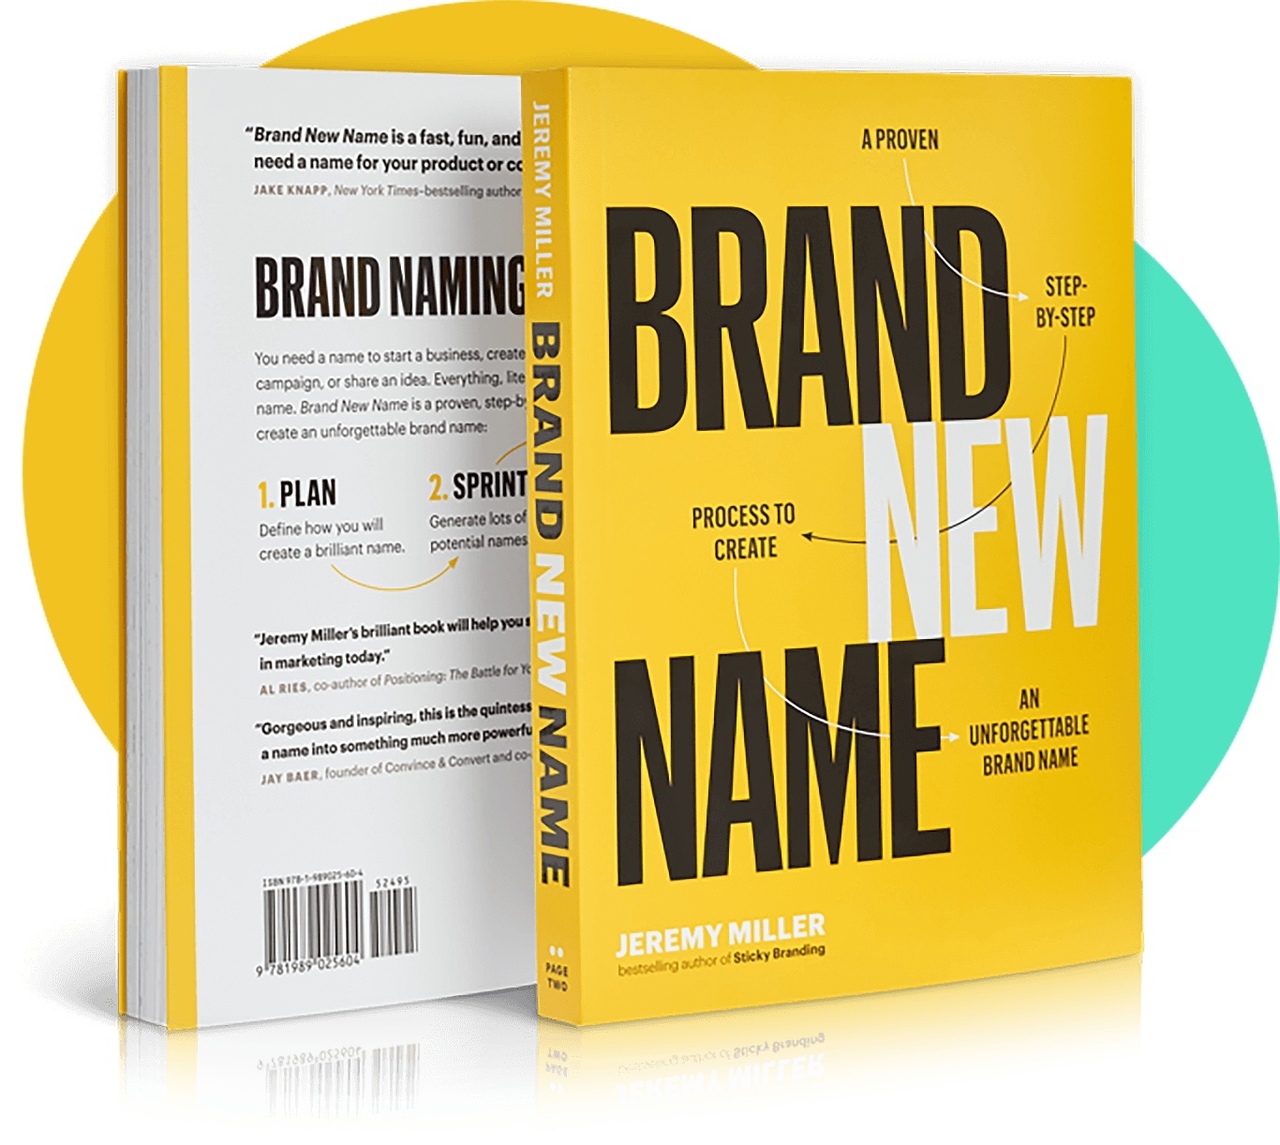 Brand New Name: A Proven, Step-by-Step Process To Create An Unforgettable Brand Name